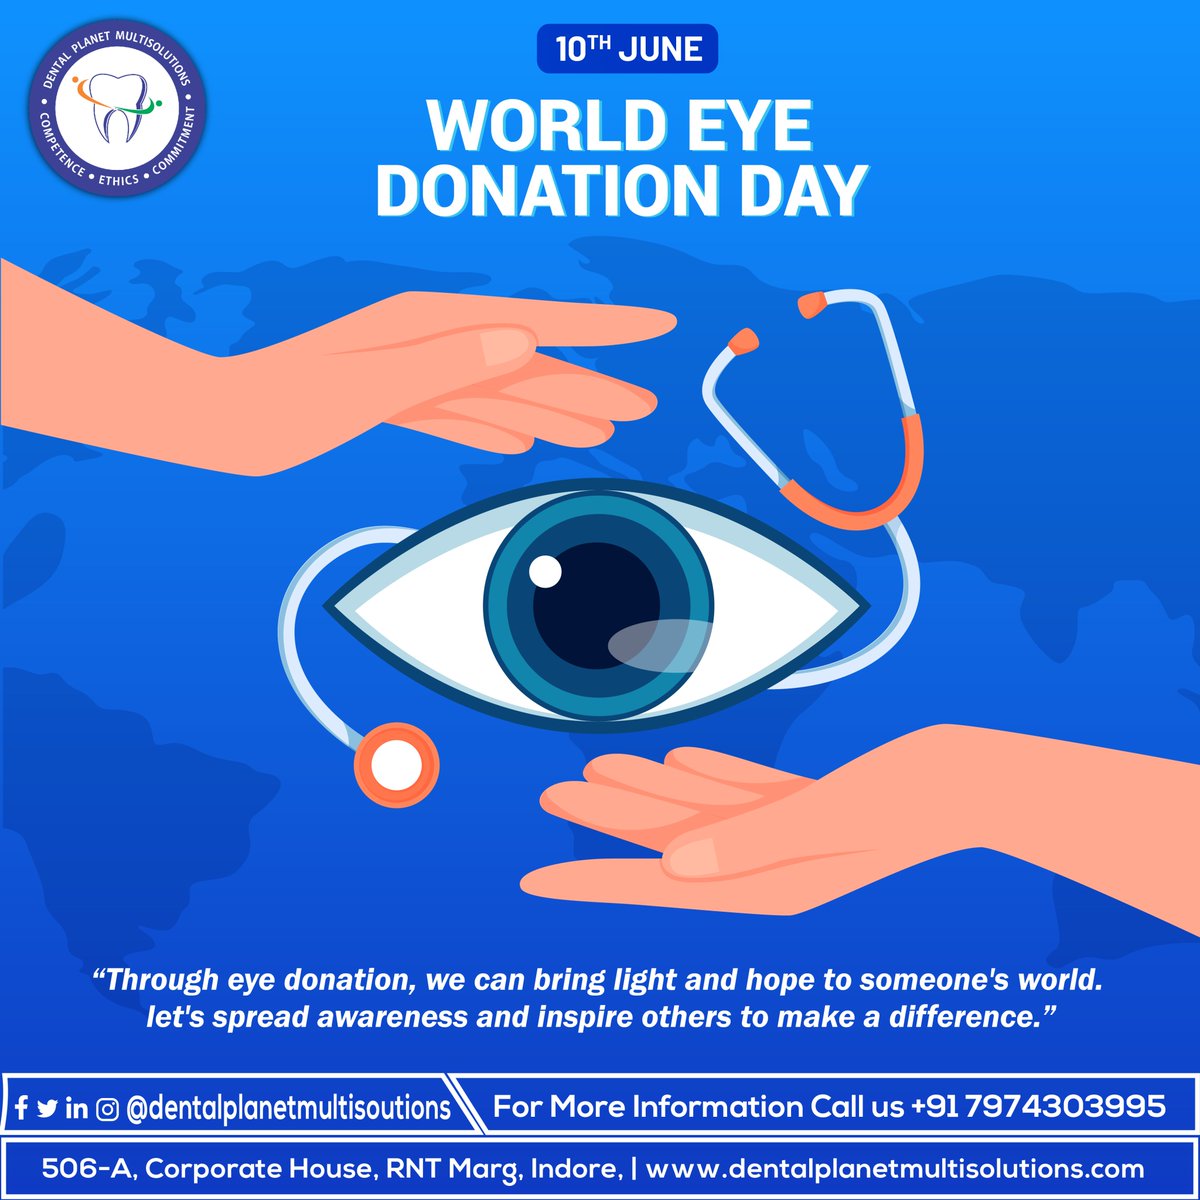 'In the depths of darkness, a spark of hope resides in the generosity of eye donors. Together, let's brighten lives and restore vision on this World Eye Donation Day.' 👀✨

#WorldEyeDonationDay #Brightenlives #eyedonor #dentalcare #dentalplanetmultisolutions #makeappointment